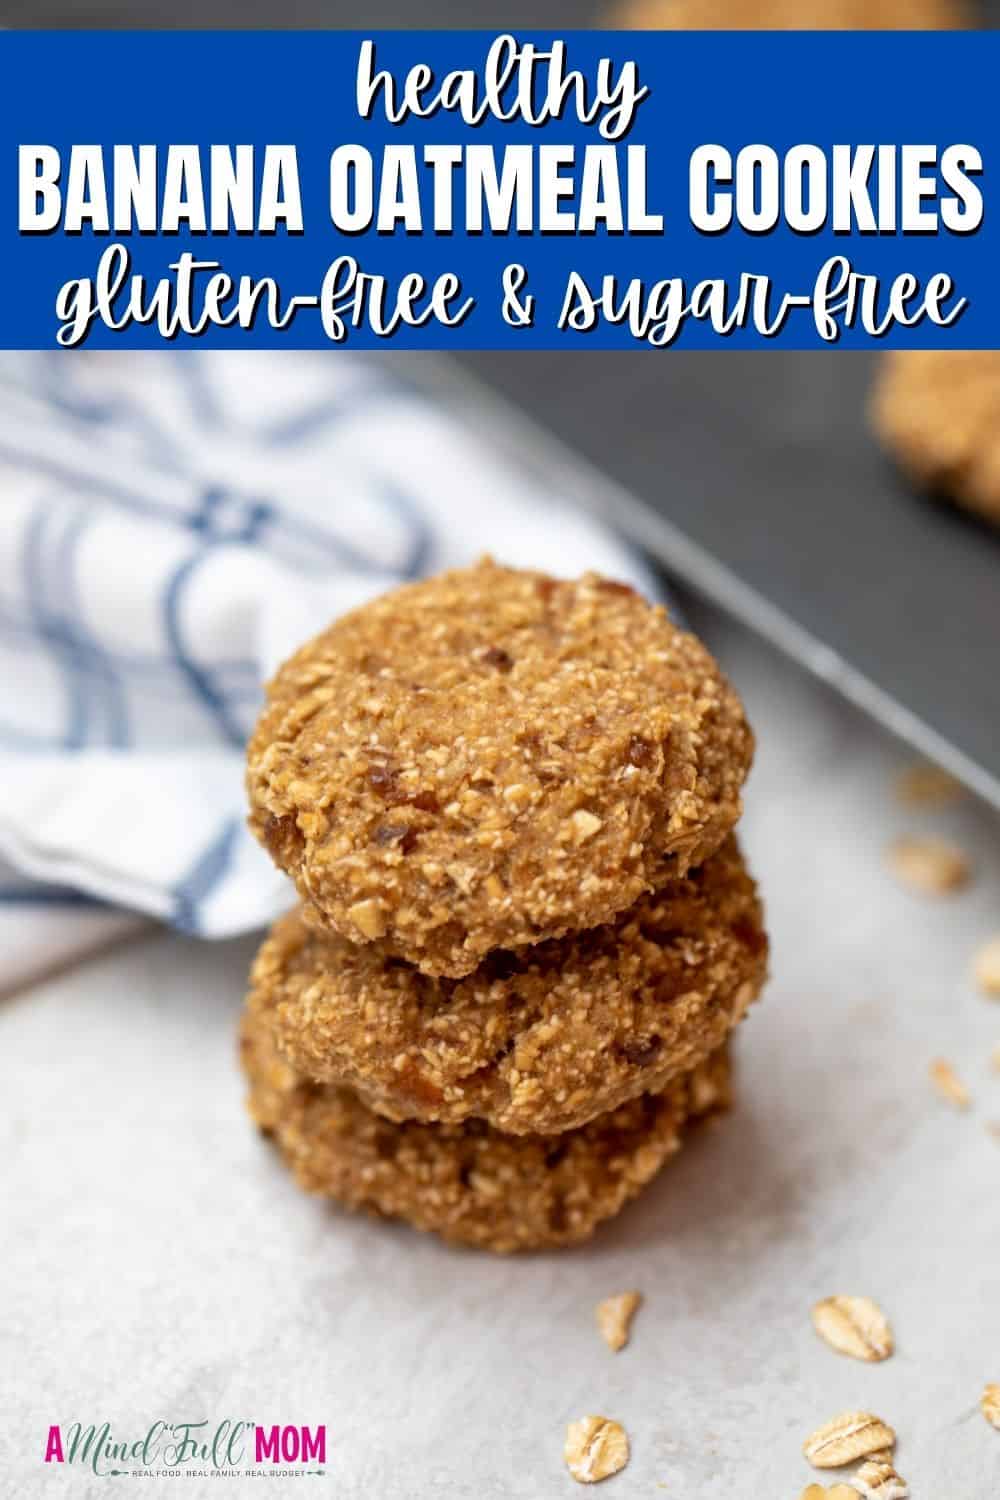 Naturally-sweetened, gluten-free, and vegan-friendly, these Banana Oatmeal Cookies satisfy your sweet tooth but are still make a perfectly healthy, balanced snack. In fact, you can even enjoy these cookies for breakfast!